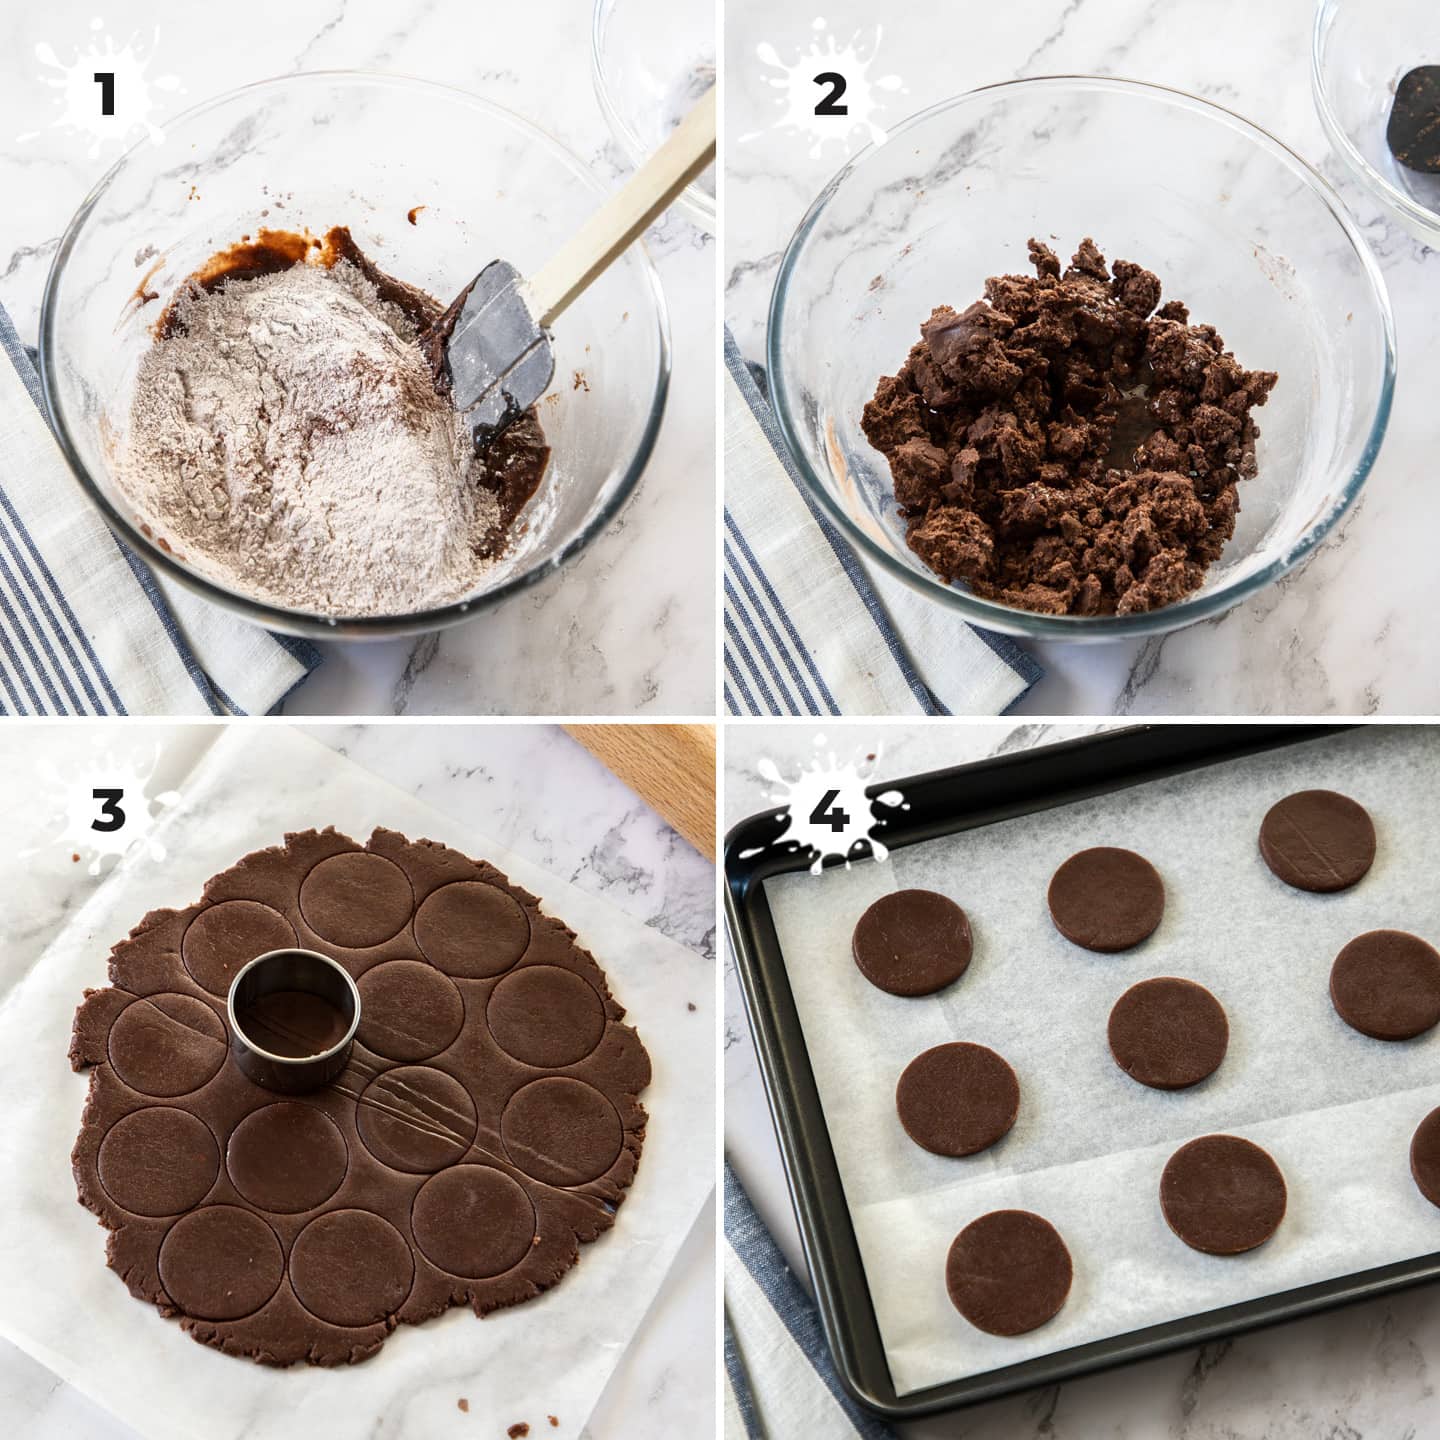 The steps for making chocolate cookie dough